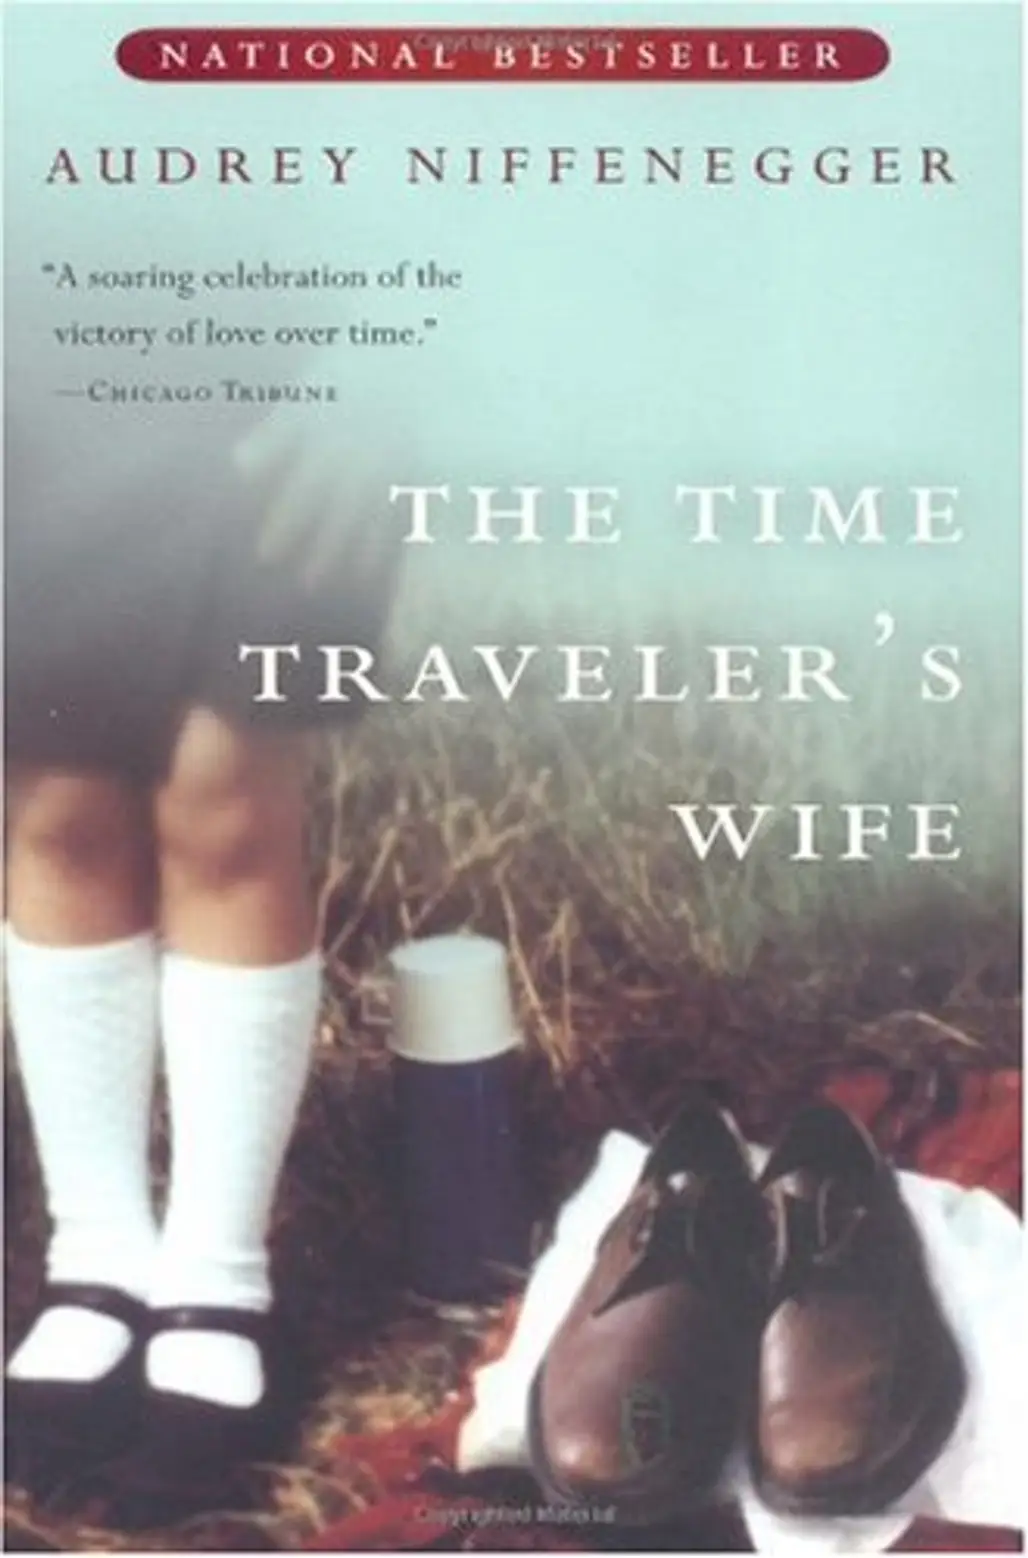 “the Time Traveler’s Wife” by Audrey Niffenegger